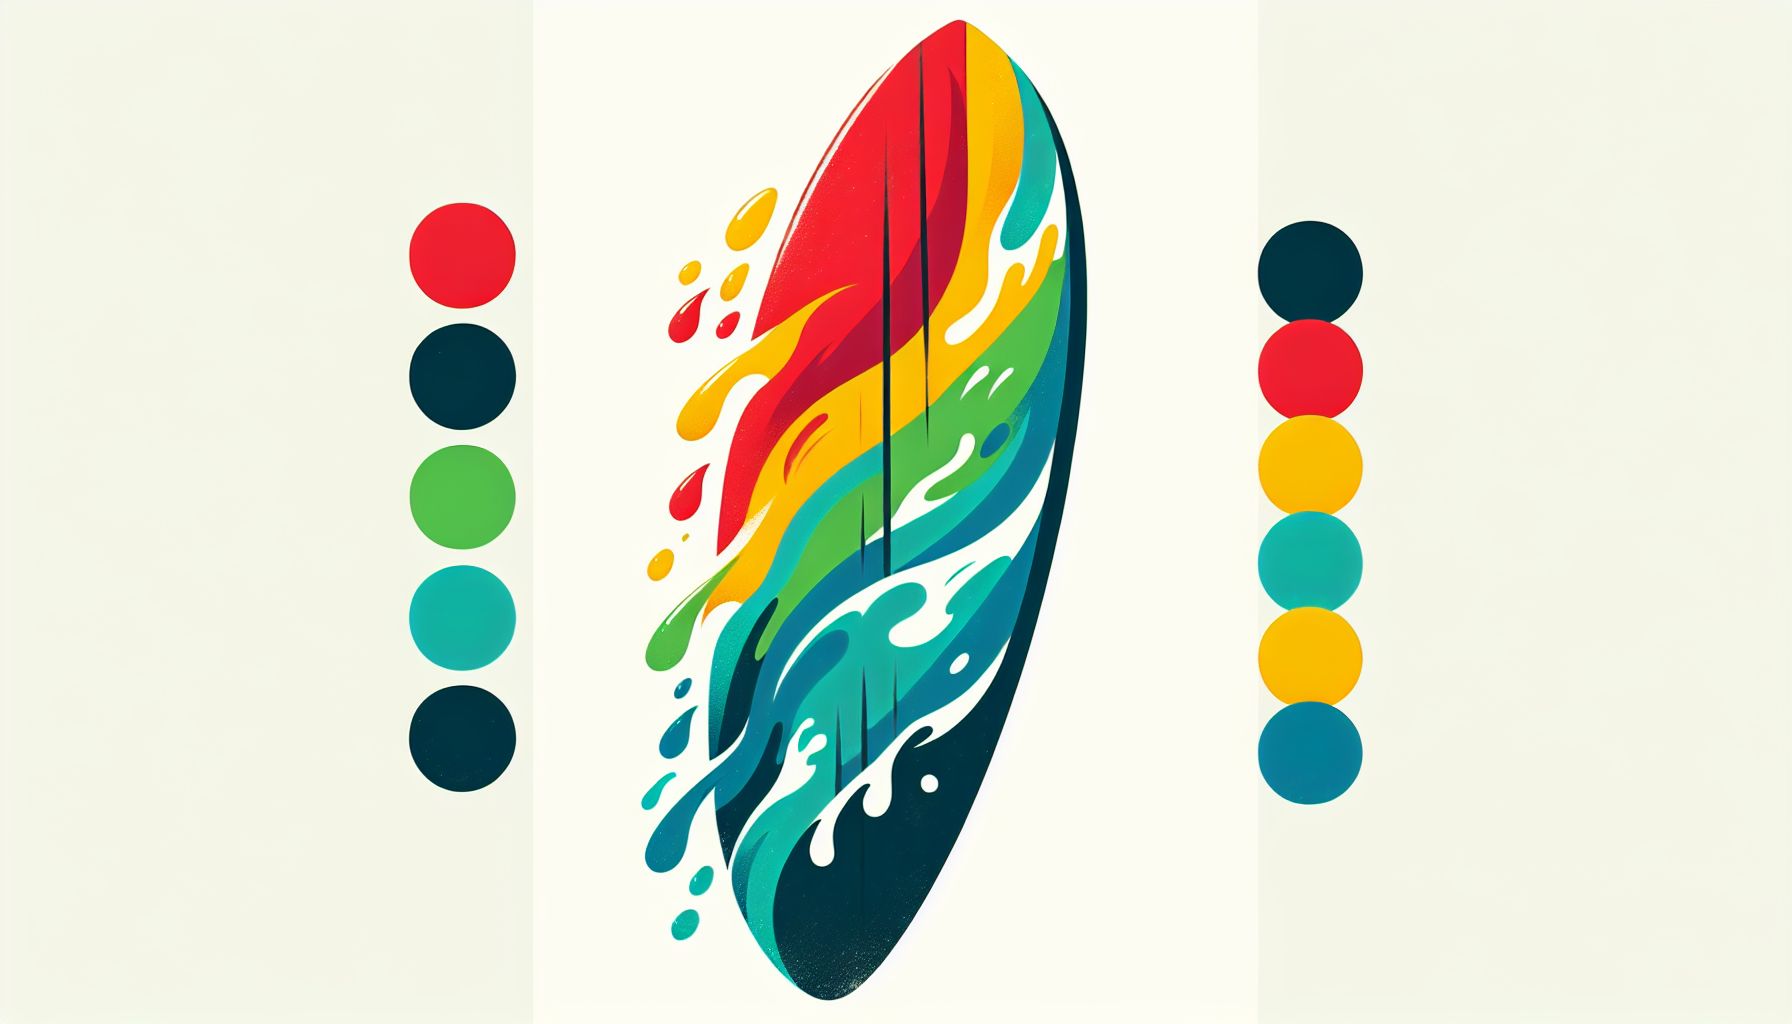 Surfboard in flat illustration style and white background, red #f47574, green #88c7a8, yellow #fcc44b, and blue #645bc8 colors.